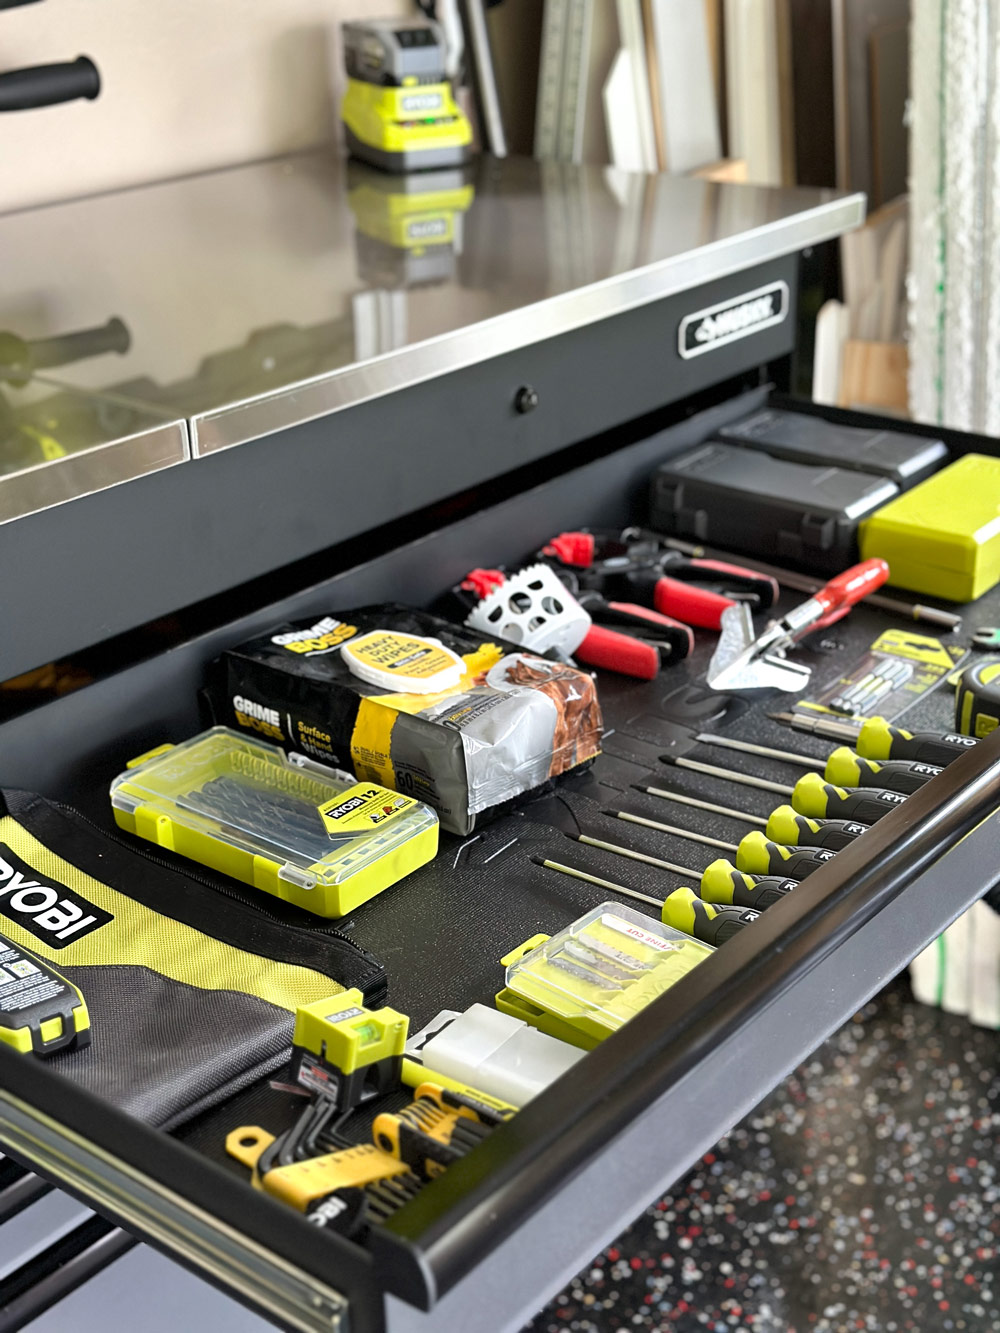 Husky workbench with a drawer opened showing small organized tools.